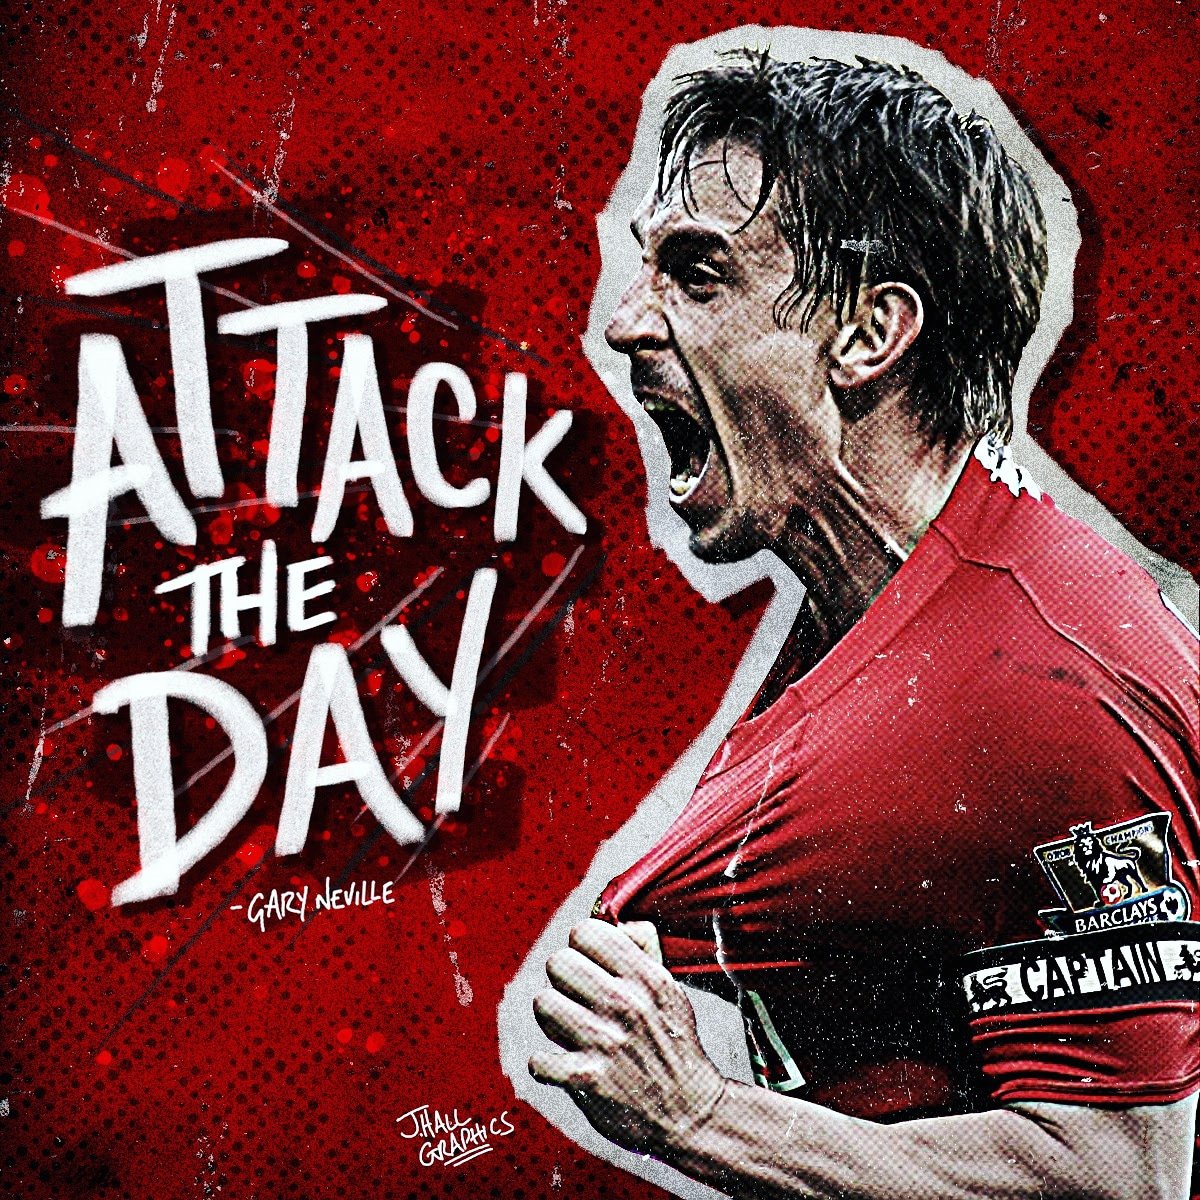 \United till I die and tell with the rest.\   Happy birthday Gary Neville 